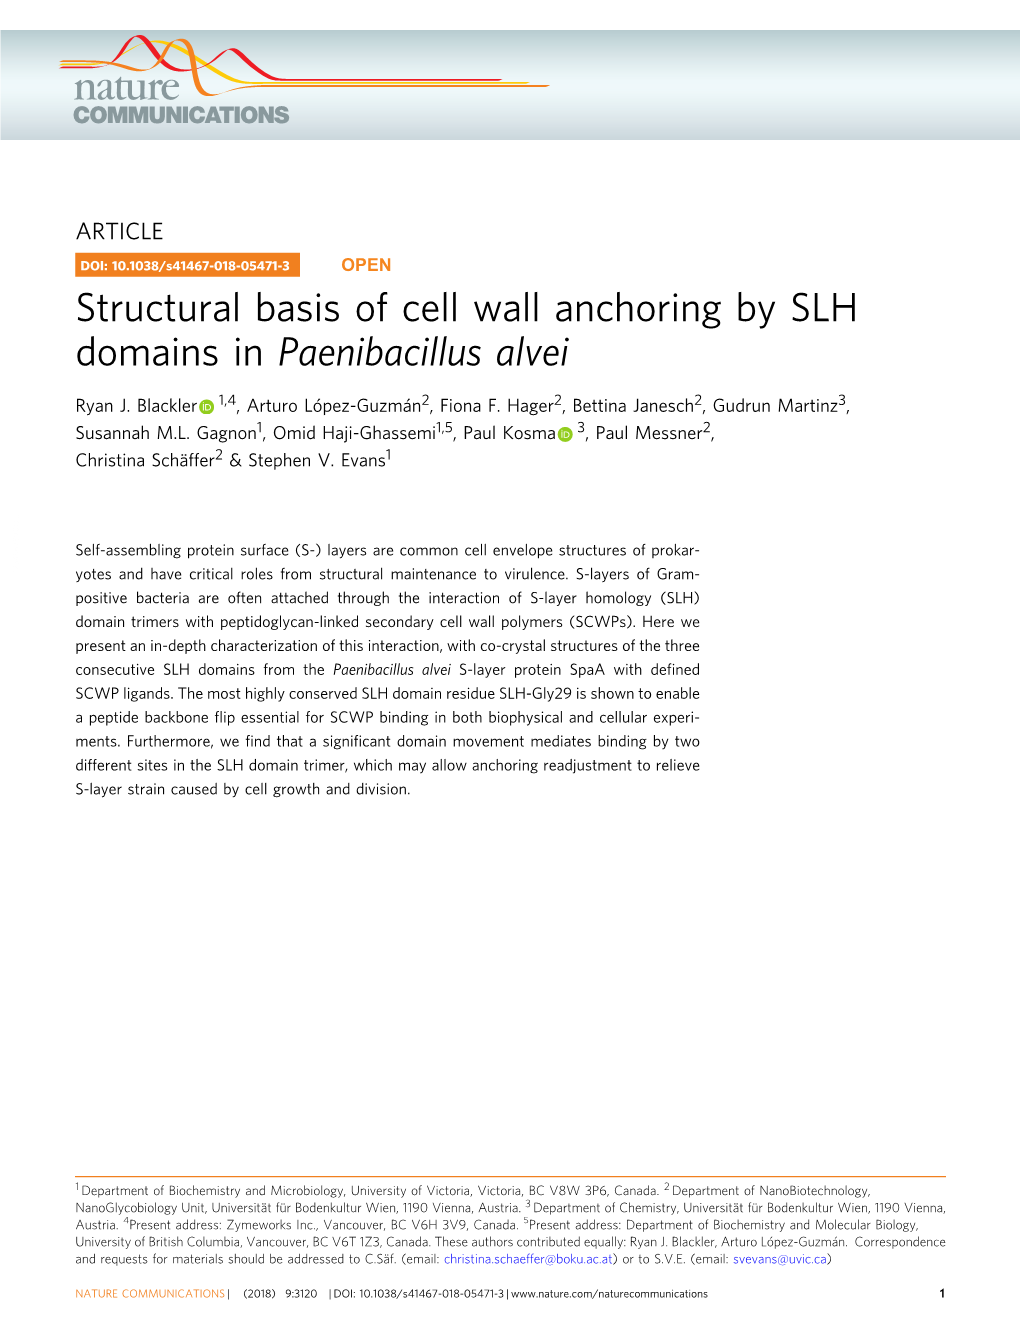 Structural Basis of Cell Wall Anchoring by SLH Domains in Paenibacillus Alvei